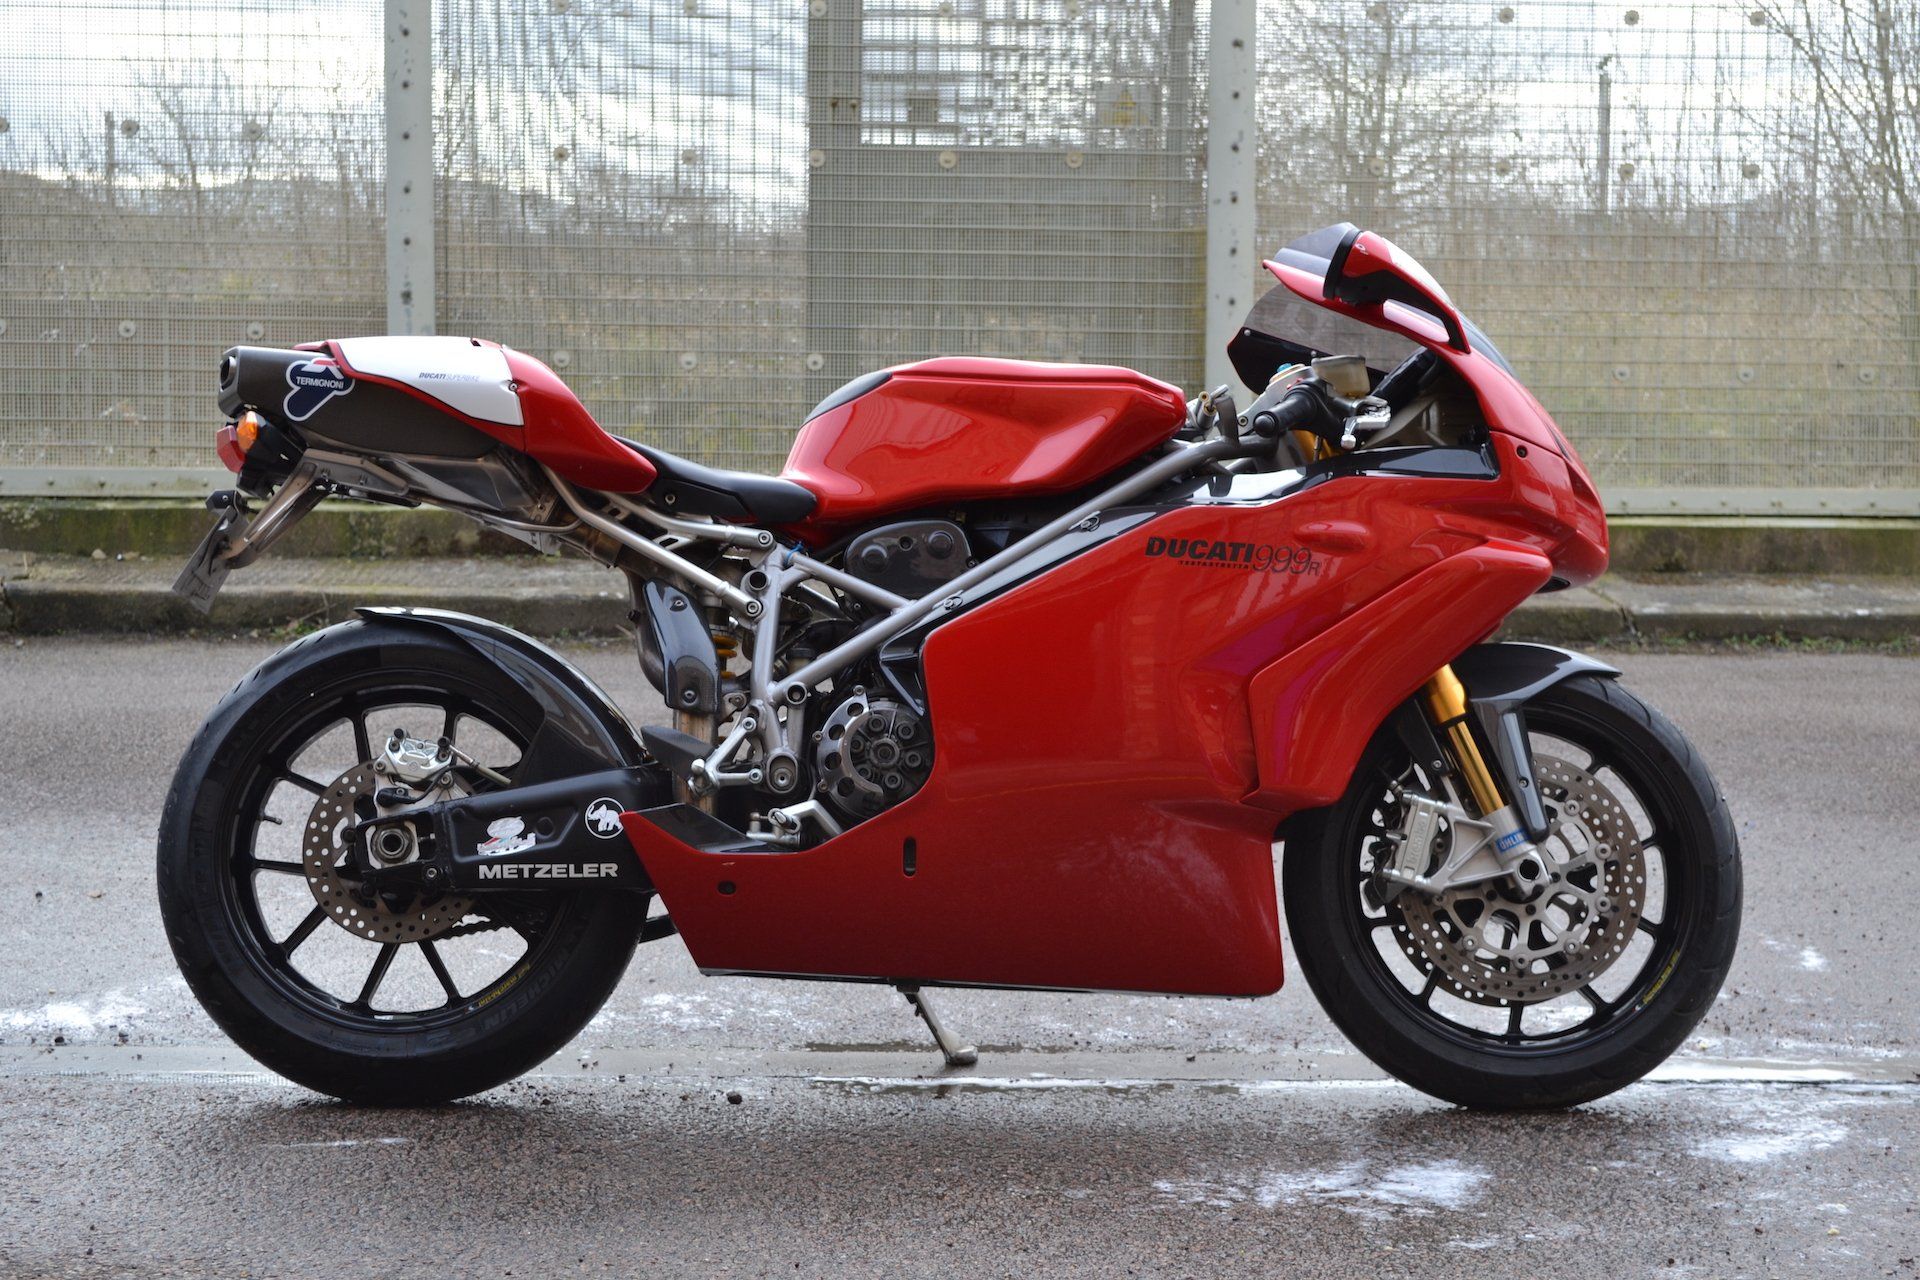 Ducati 999R parked outside